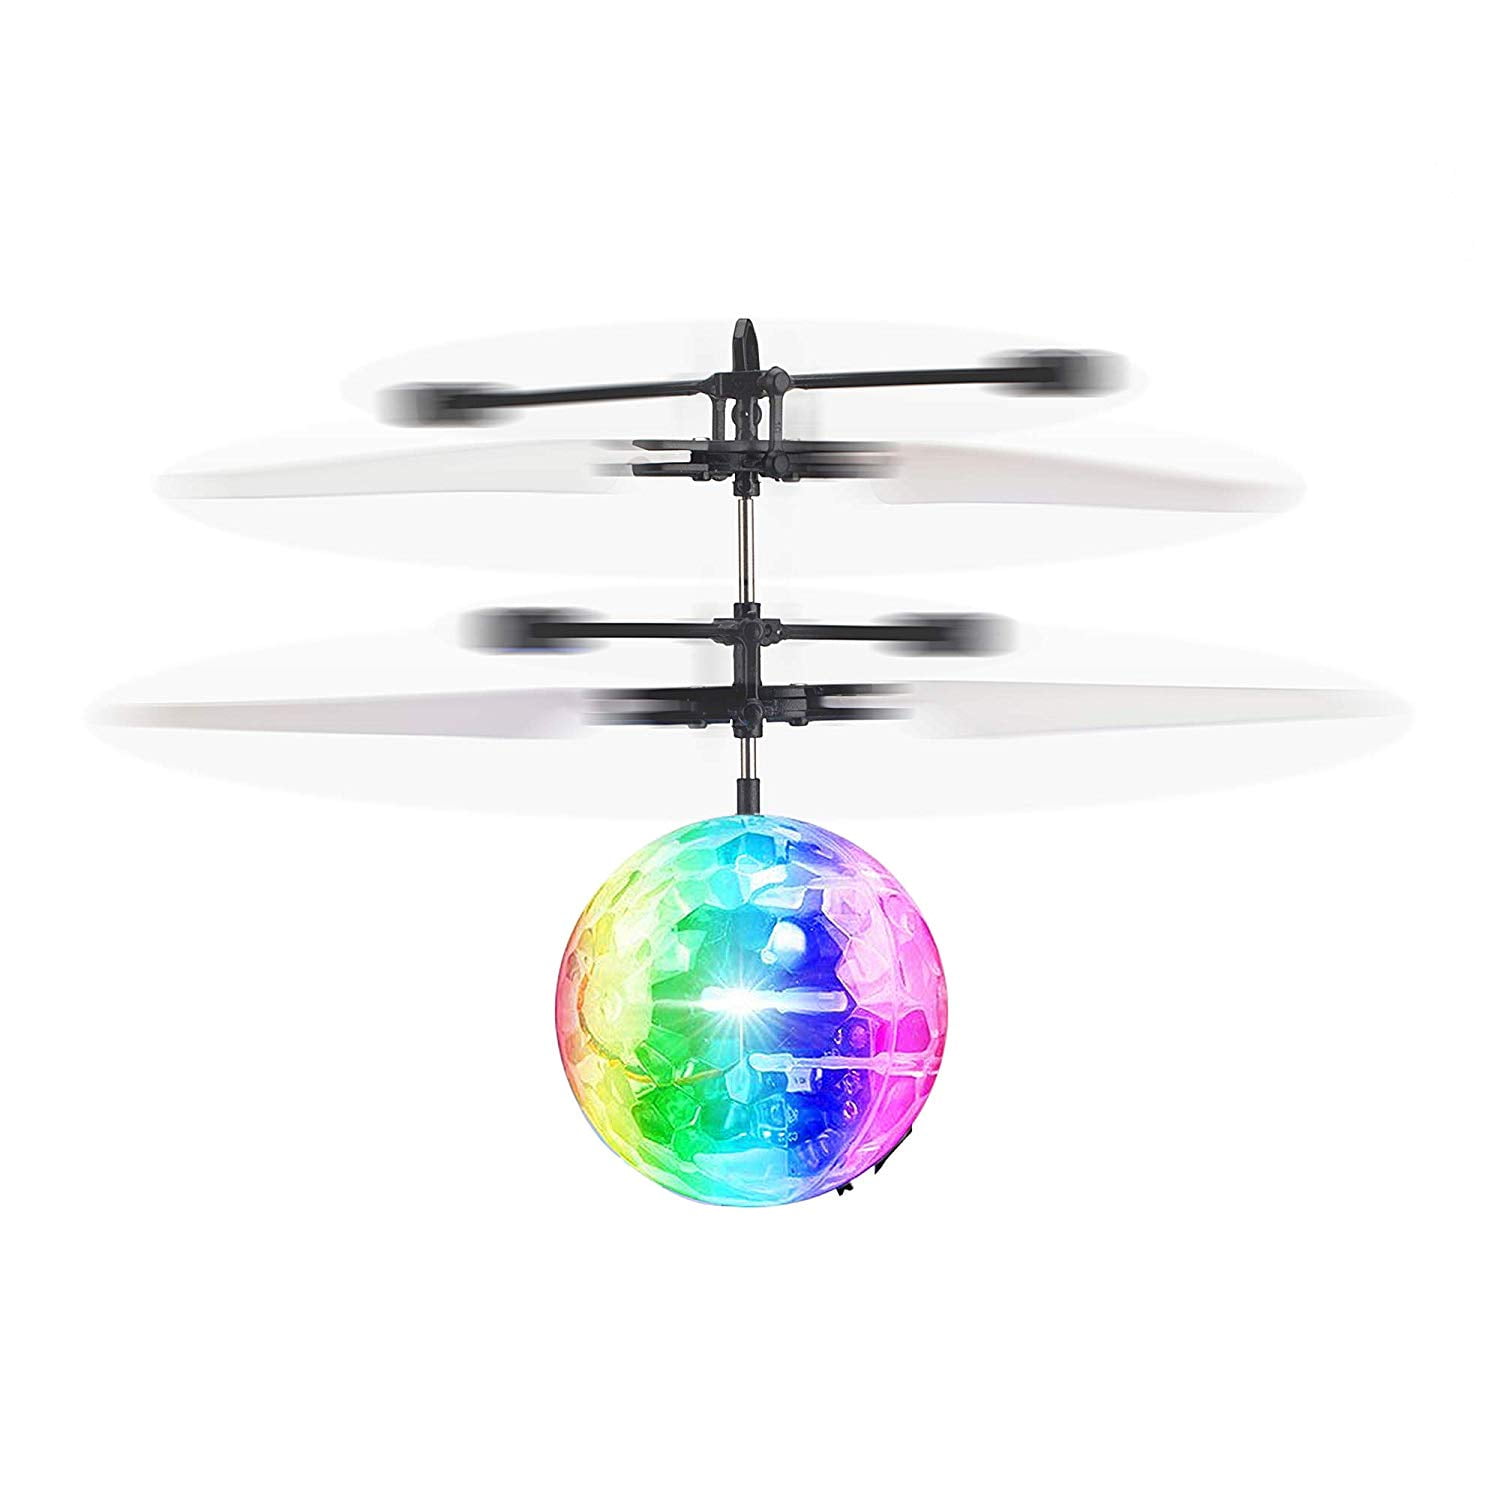 Perfk Rechargeable Mini LED Light Up Infrared Induction Drone Flying Toy 